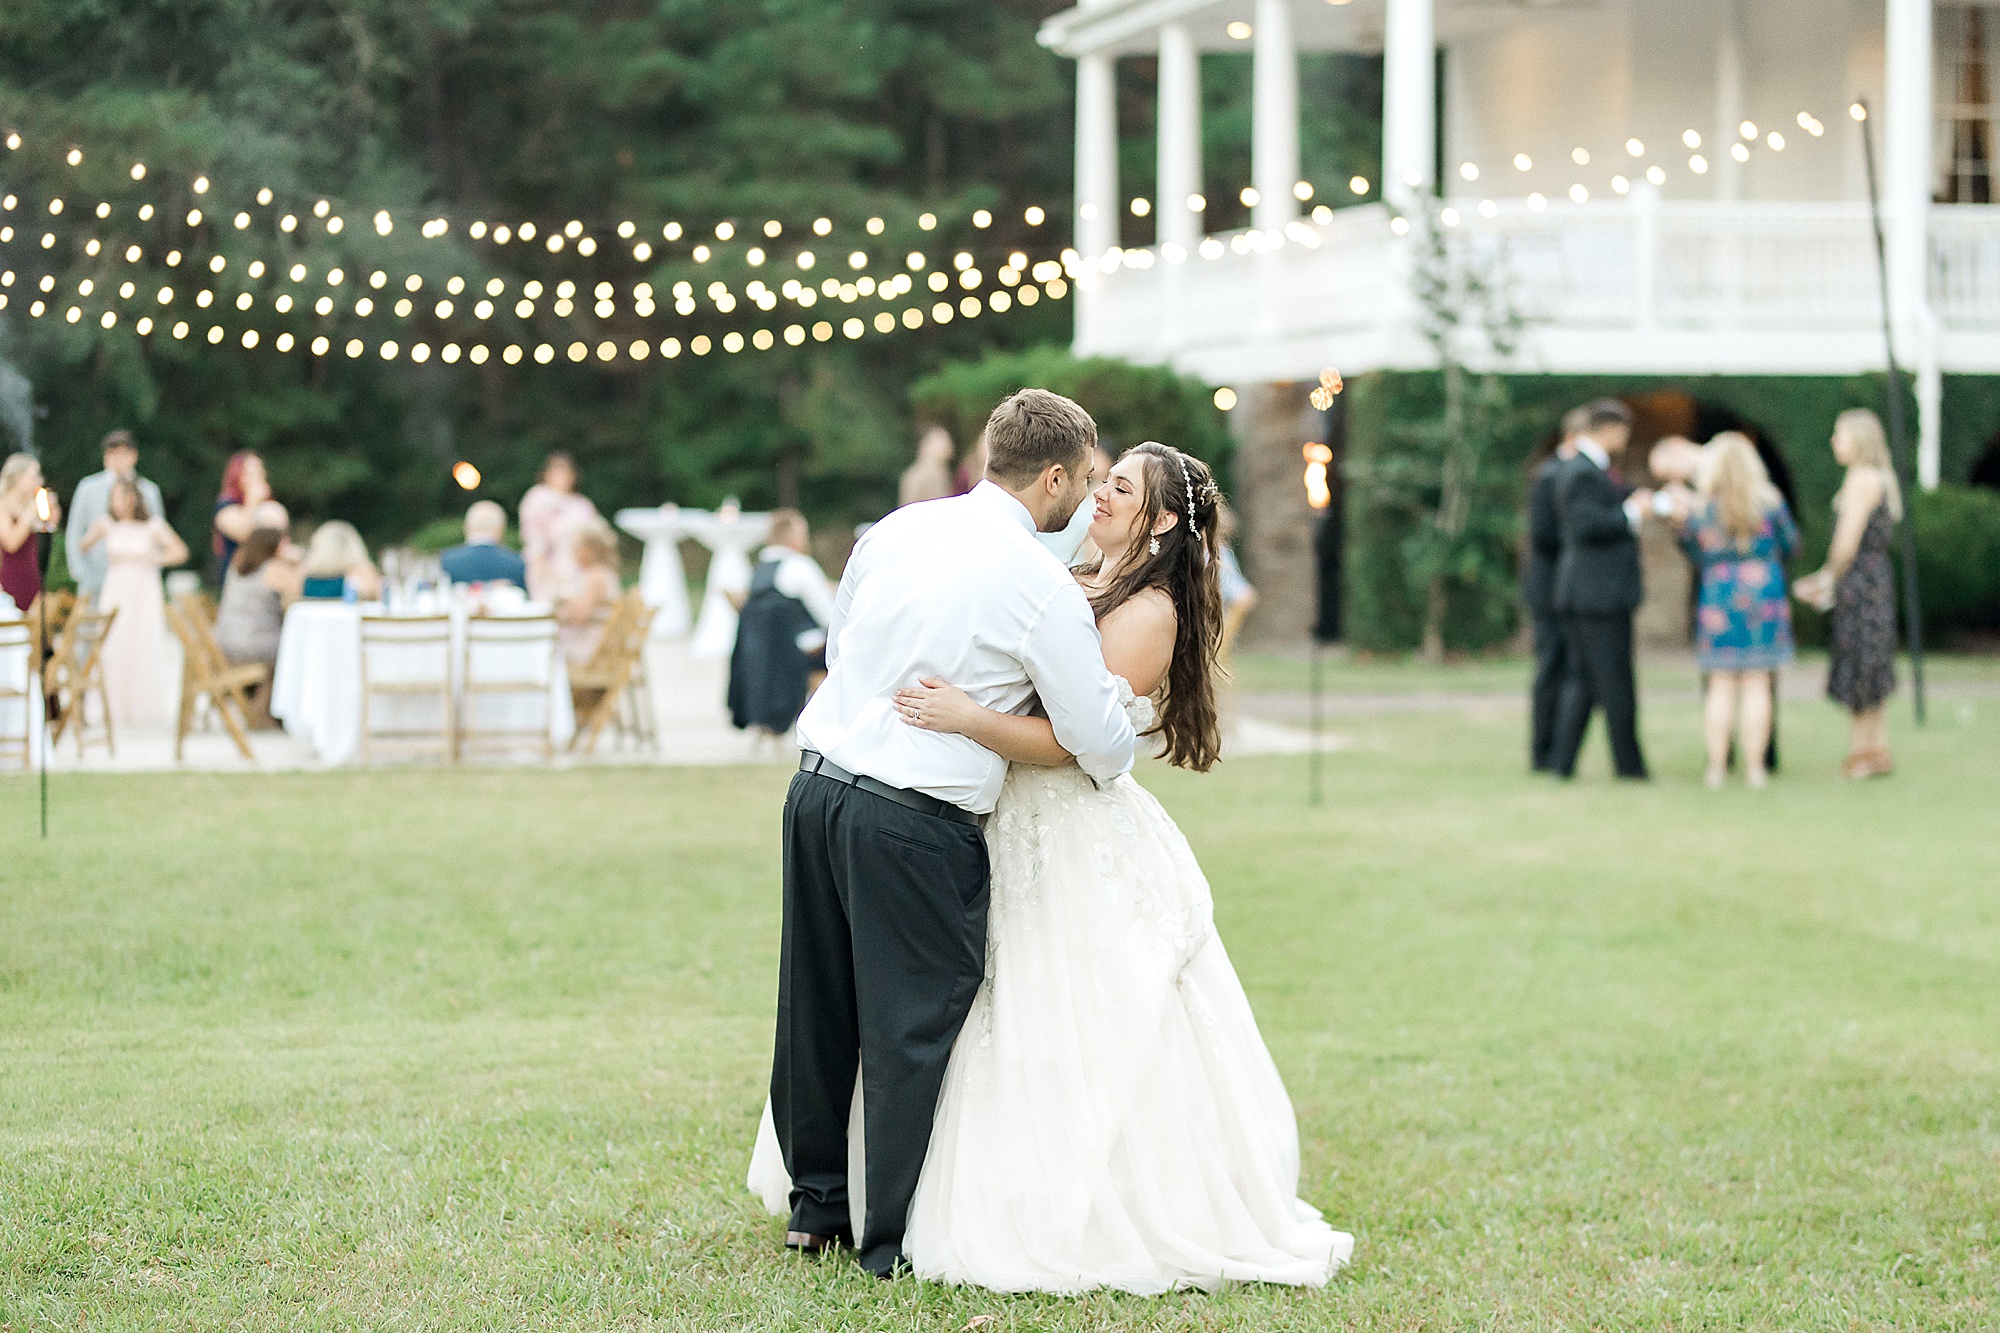 Charleston Wedding photographer captures newlyweds stealing a moment together